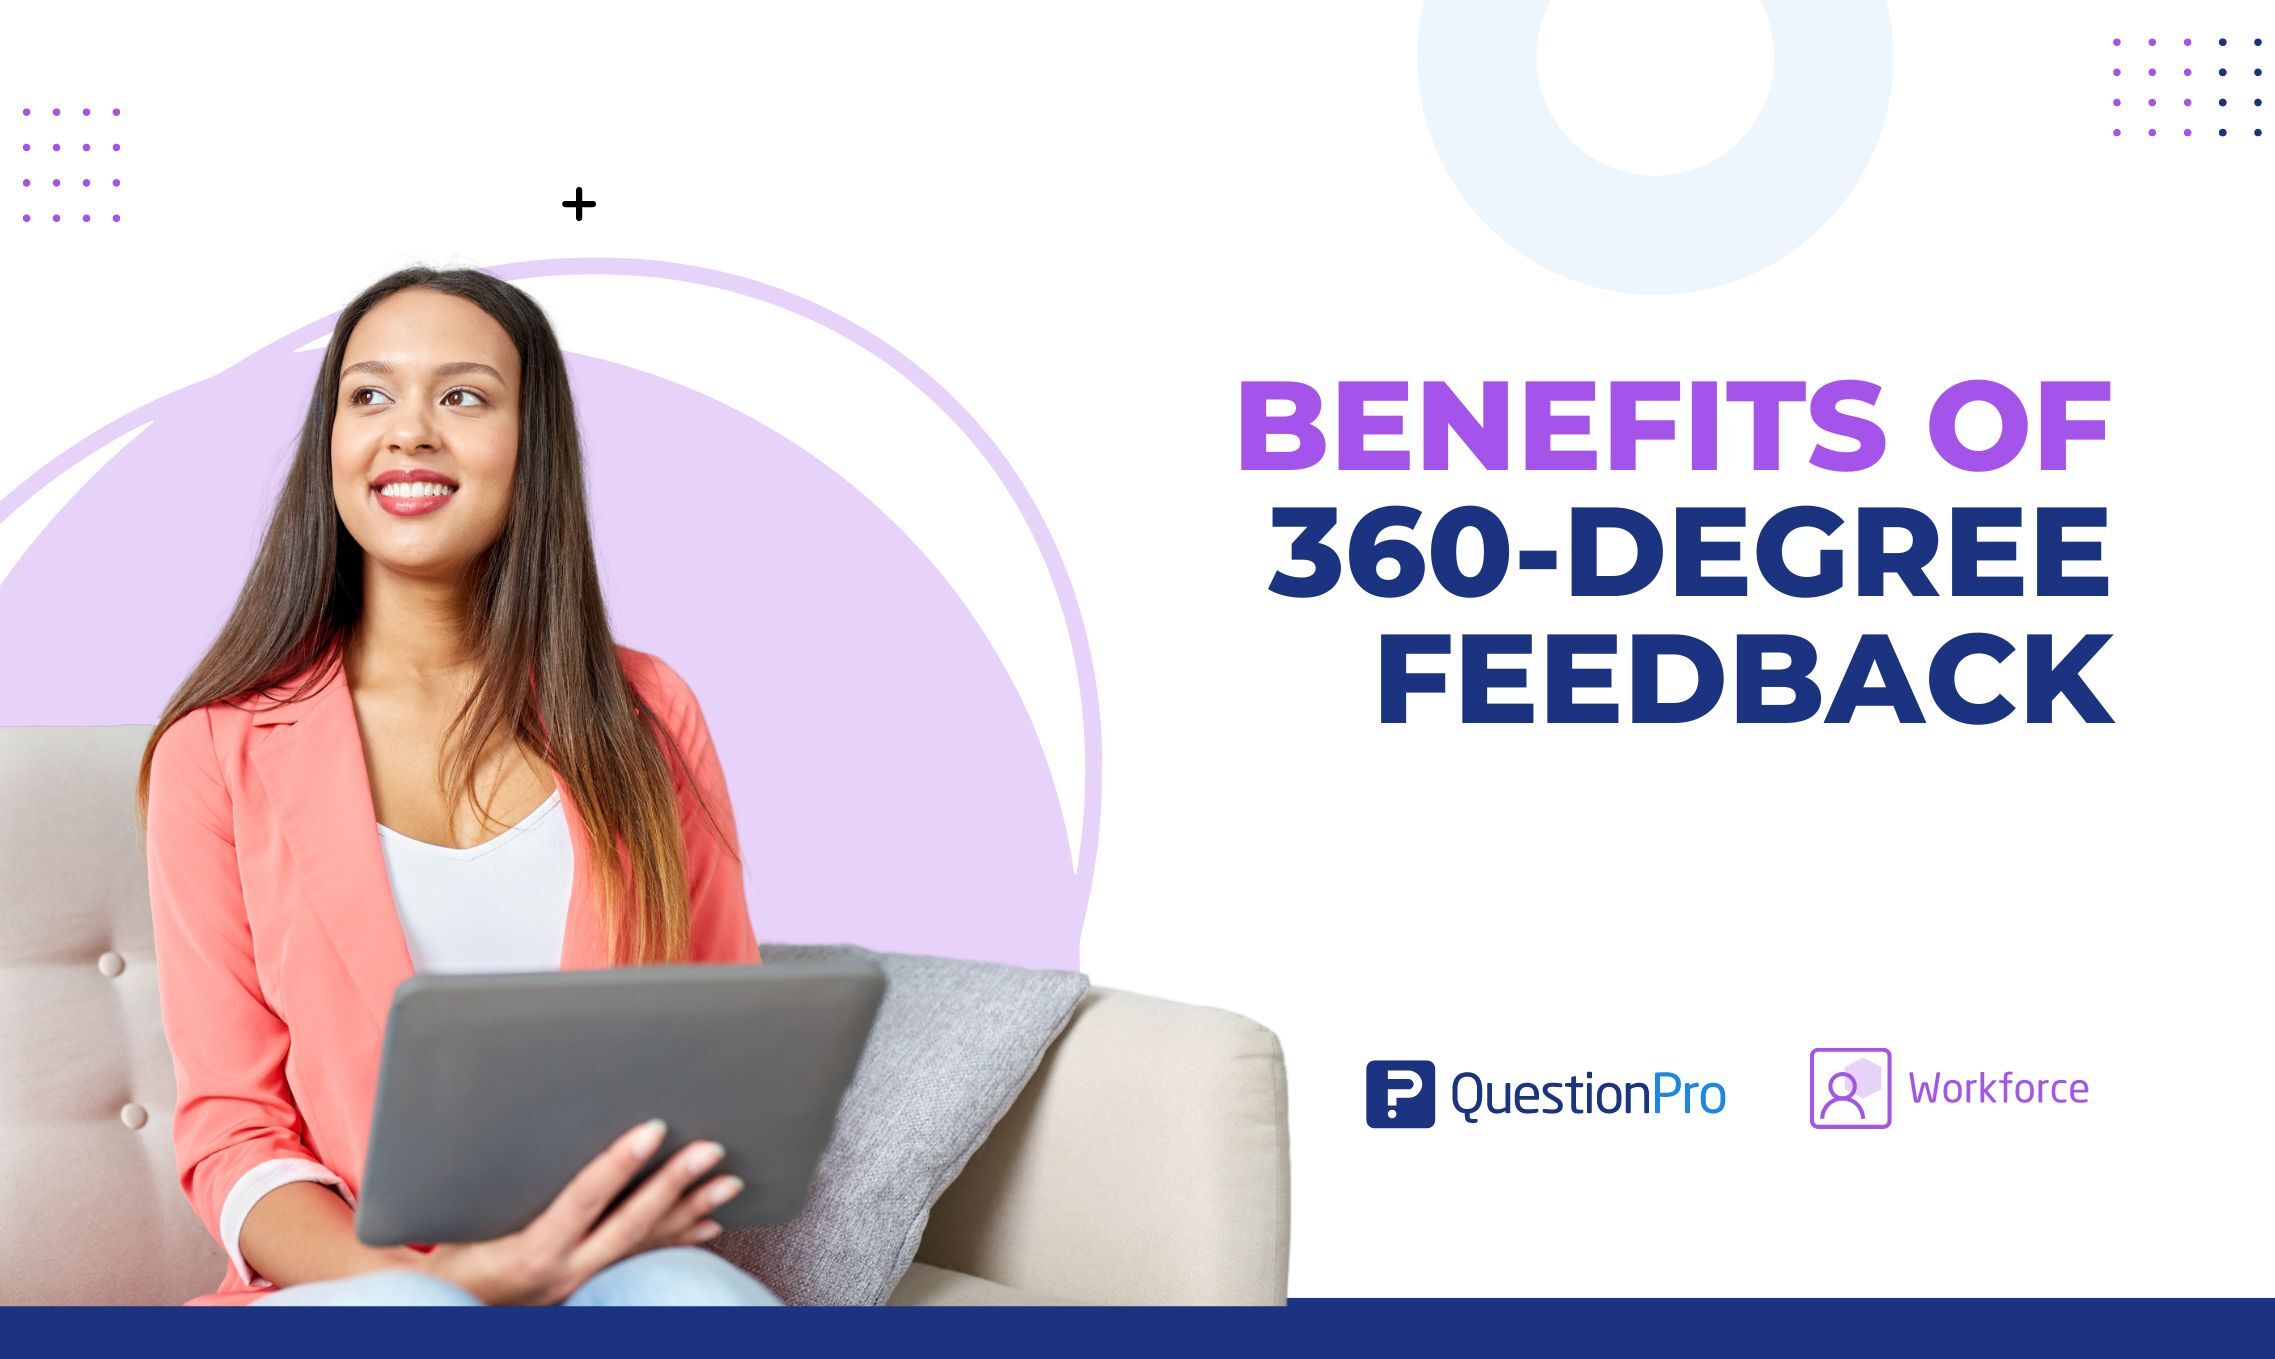 Discover the empowering benefits of 360 Degree Feedback for leadership growth and positive impact in organizations. Learn more.